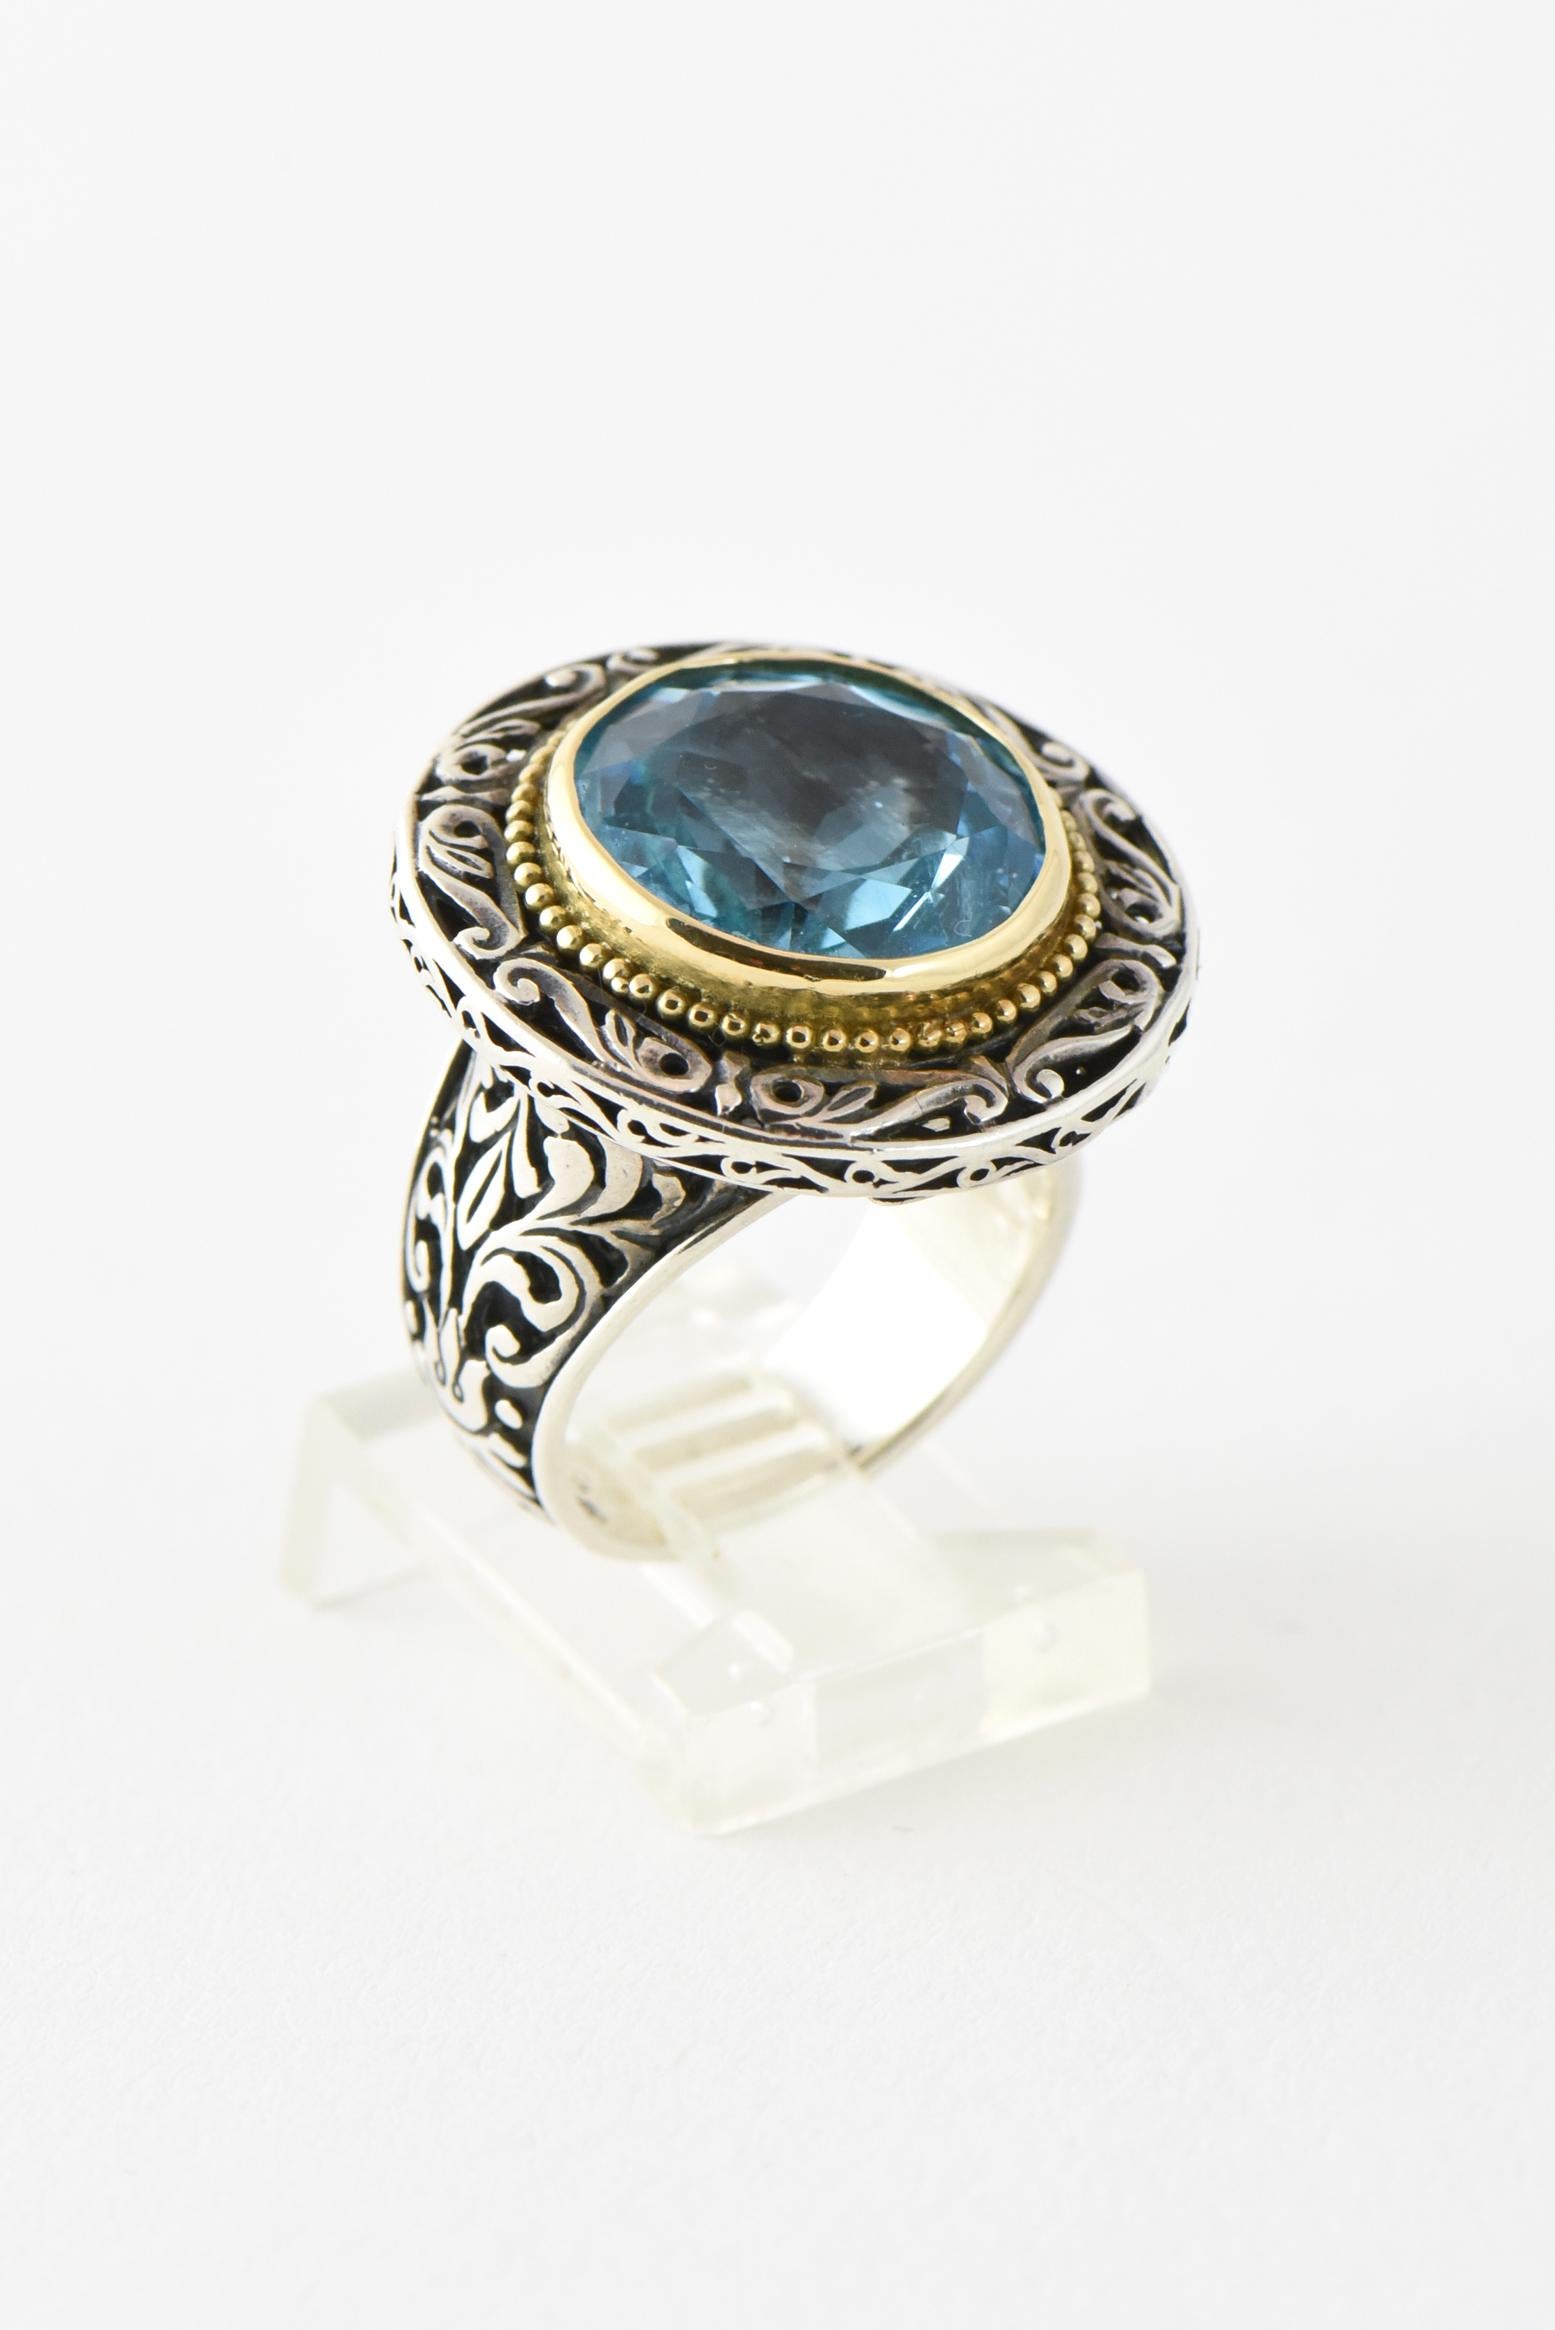 Konstantino sterling silver ring featuring filigree openwork frame and band with 18K yellow gold bezel-set faceted round blue topaz. Marked: 750, 925 and Konstantino. U.S. ring size: 5.75. Minor wear.

Konstantino - Enthralled with Greek history and